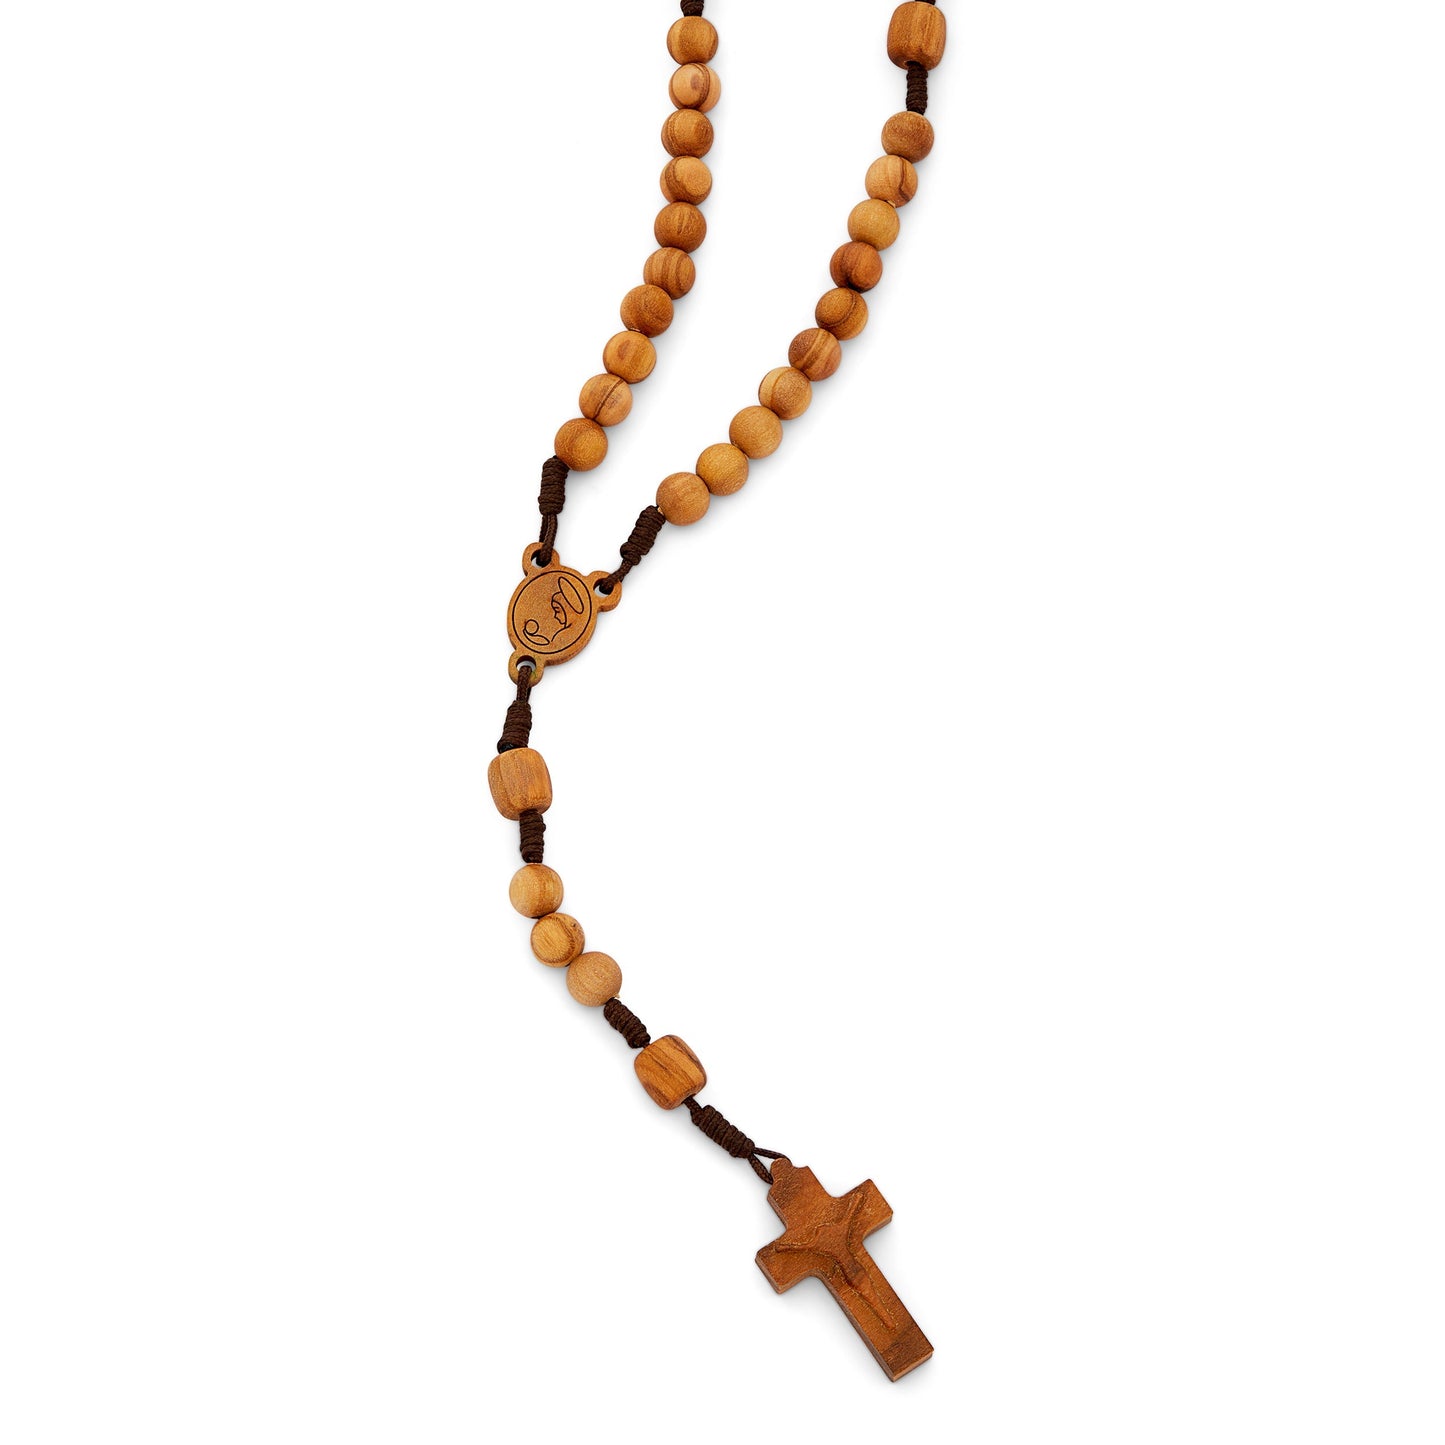 MONDO CATTOLICO Prayer Beads Rope Rosary Olive Wood Beads Mother Mary and Child